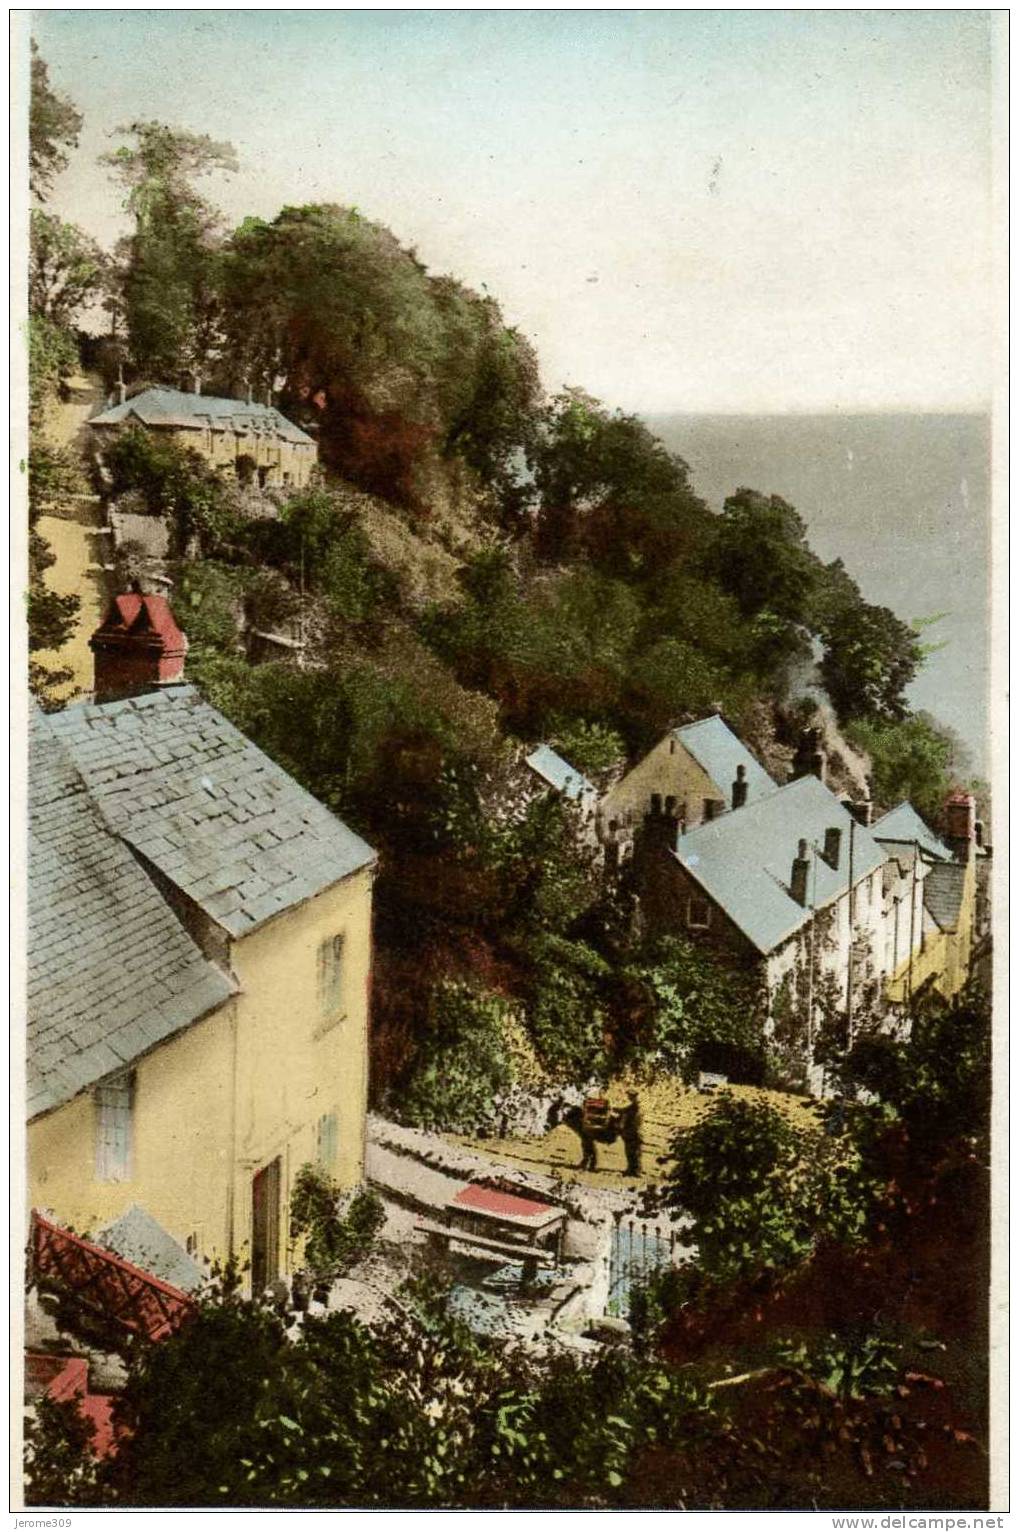 ROYAUME-UNI - CLOVELLY - CPA - Clovelly From Above - Mulet, Ane - Ellis Art Series - Clovelly